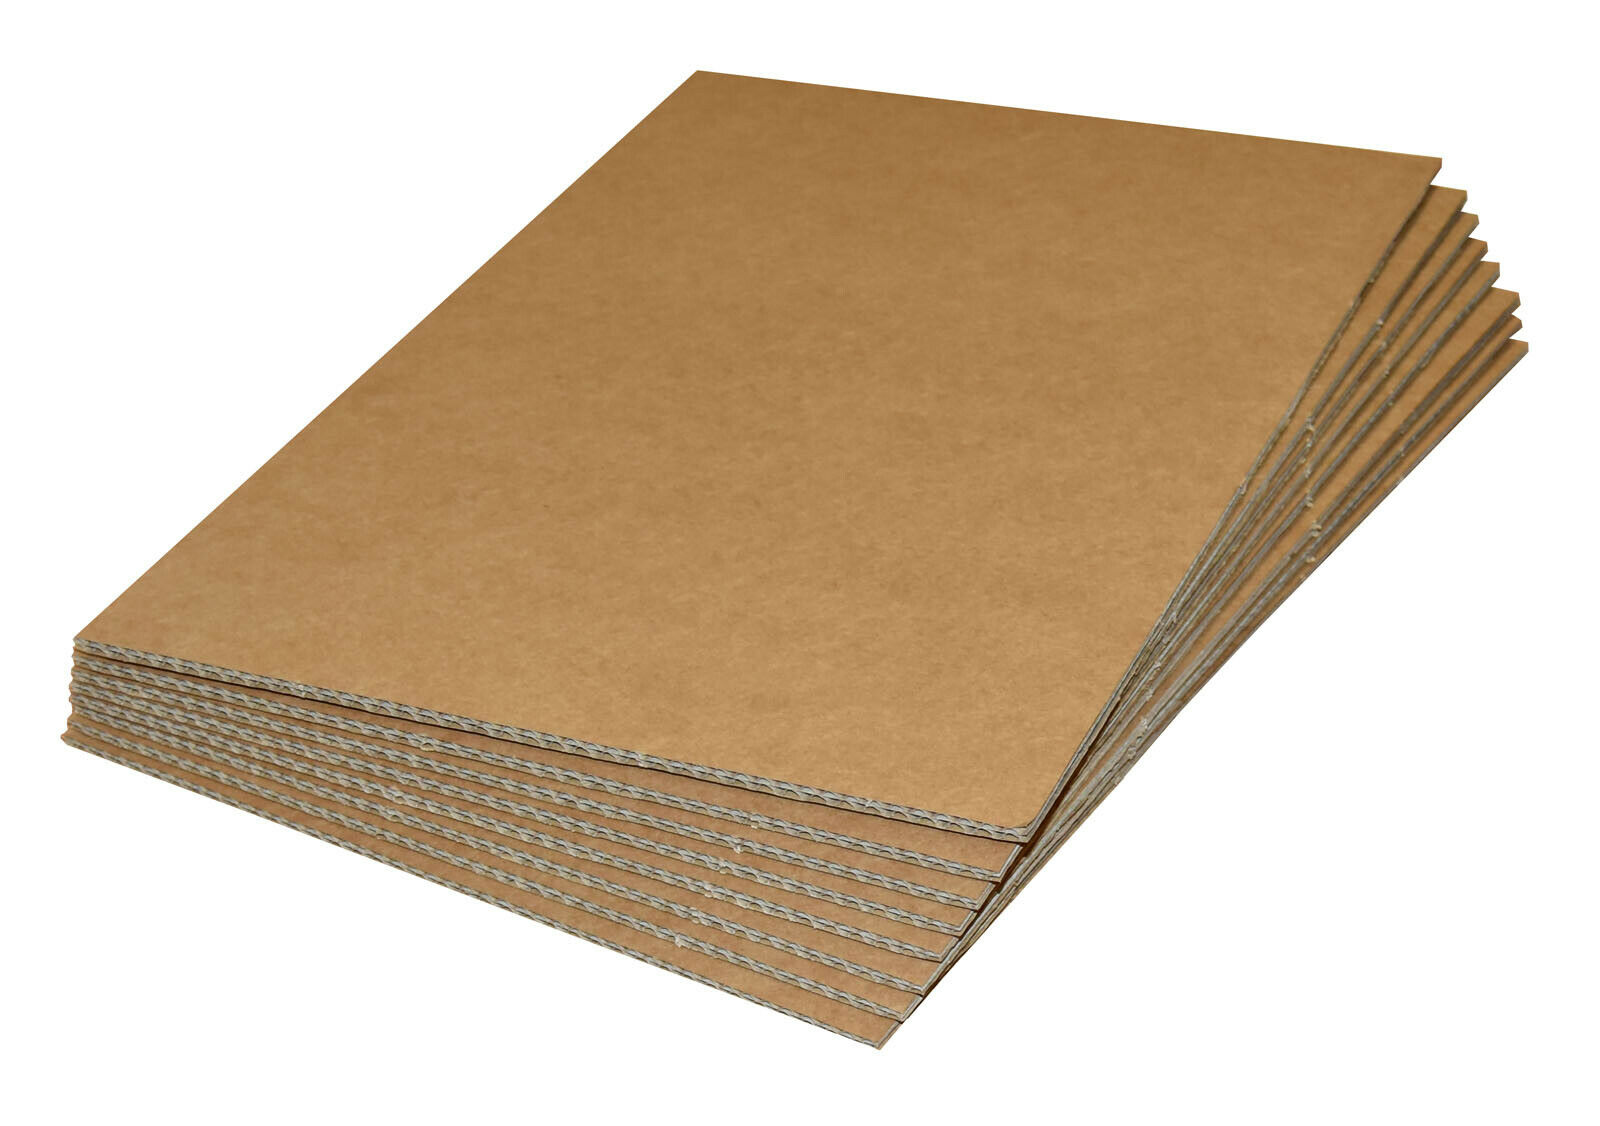 A4 A3 A2 A1 Double Wall Cardboard Corrugated Sheets Pads Divider Art Craft Board